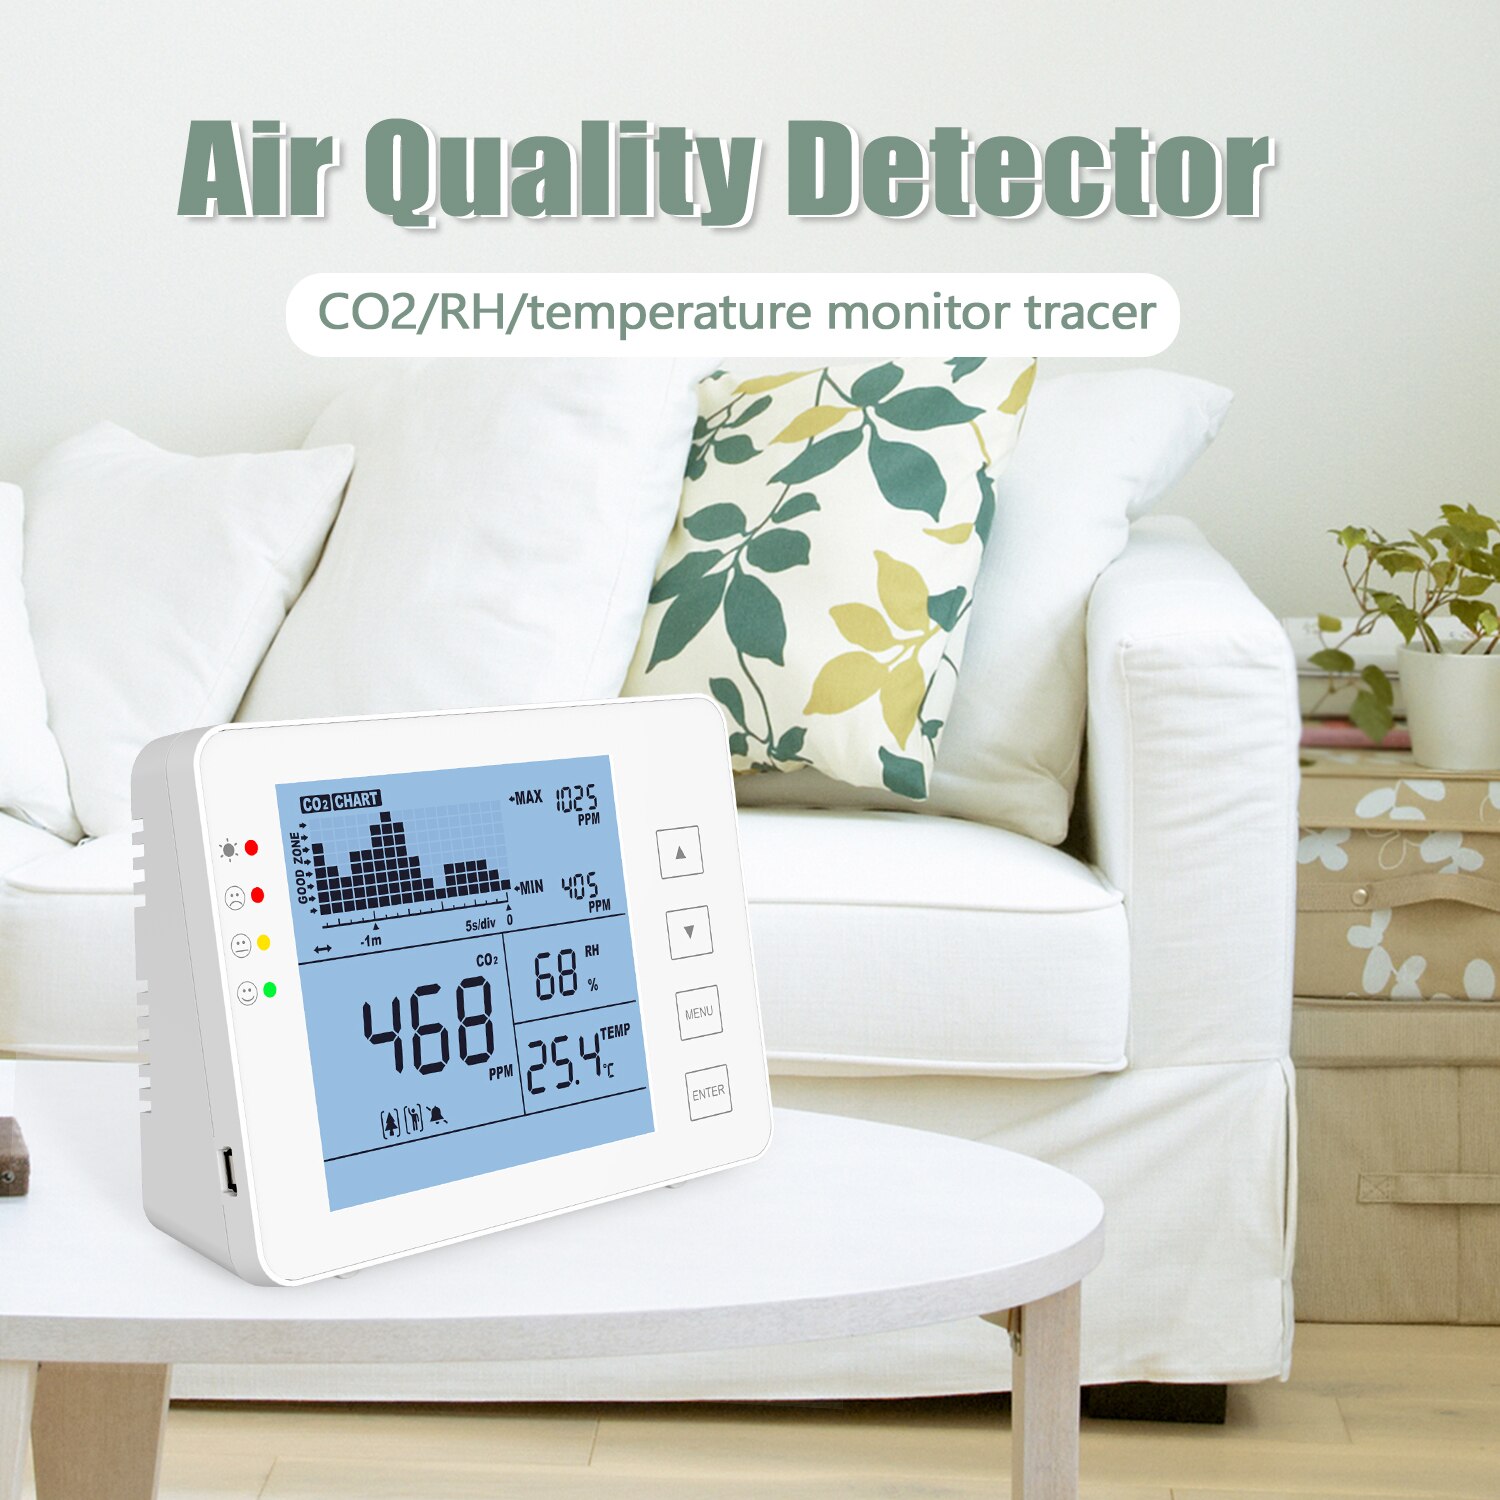 CO2 Meter Carbon Dioxide Detector Gas Detector Temperature and Relative Humidity Wall Mounted Air Quality Monitor NDIR Sensor